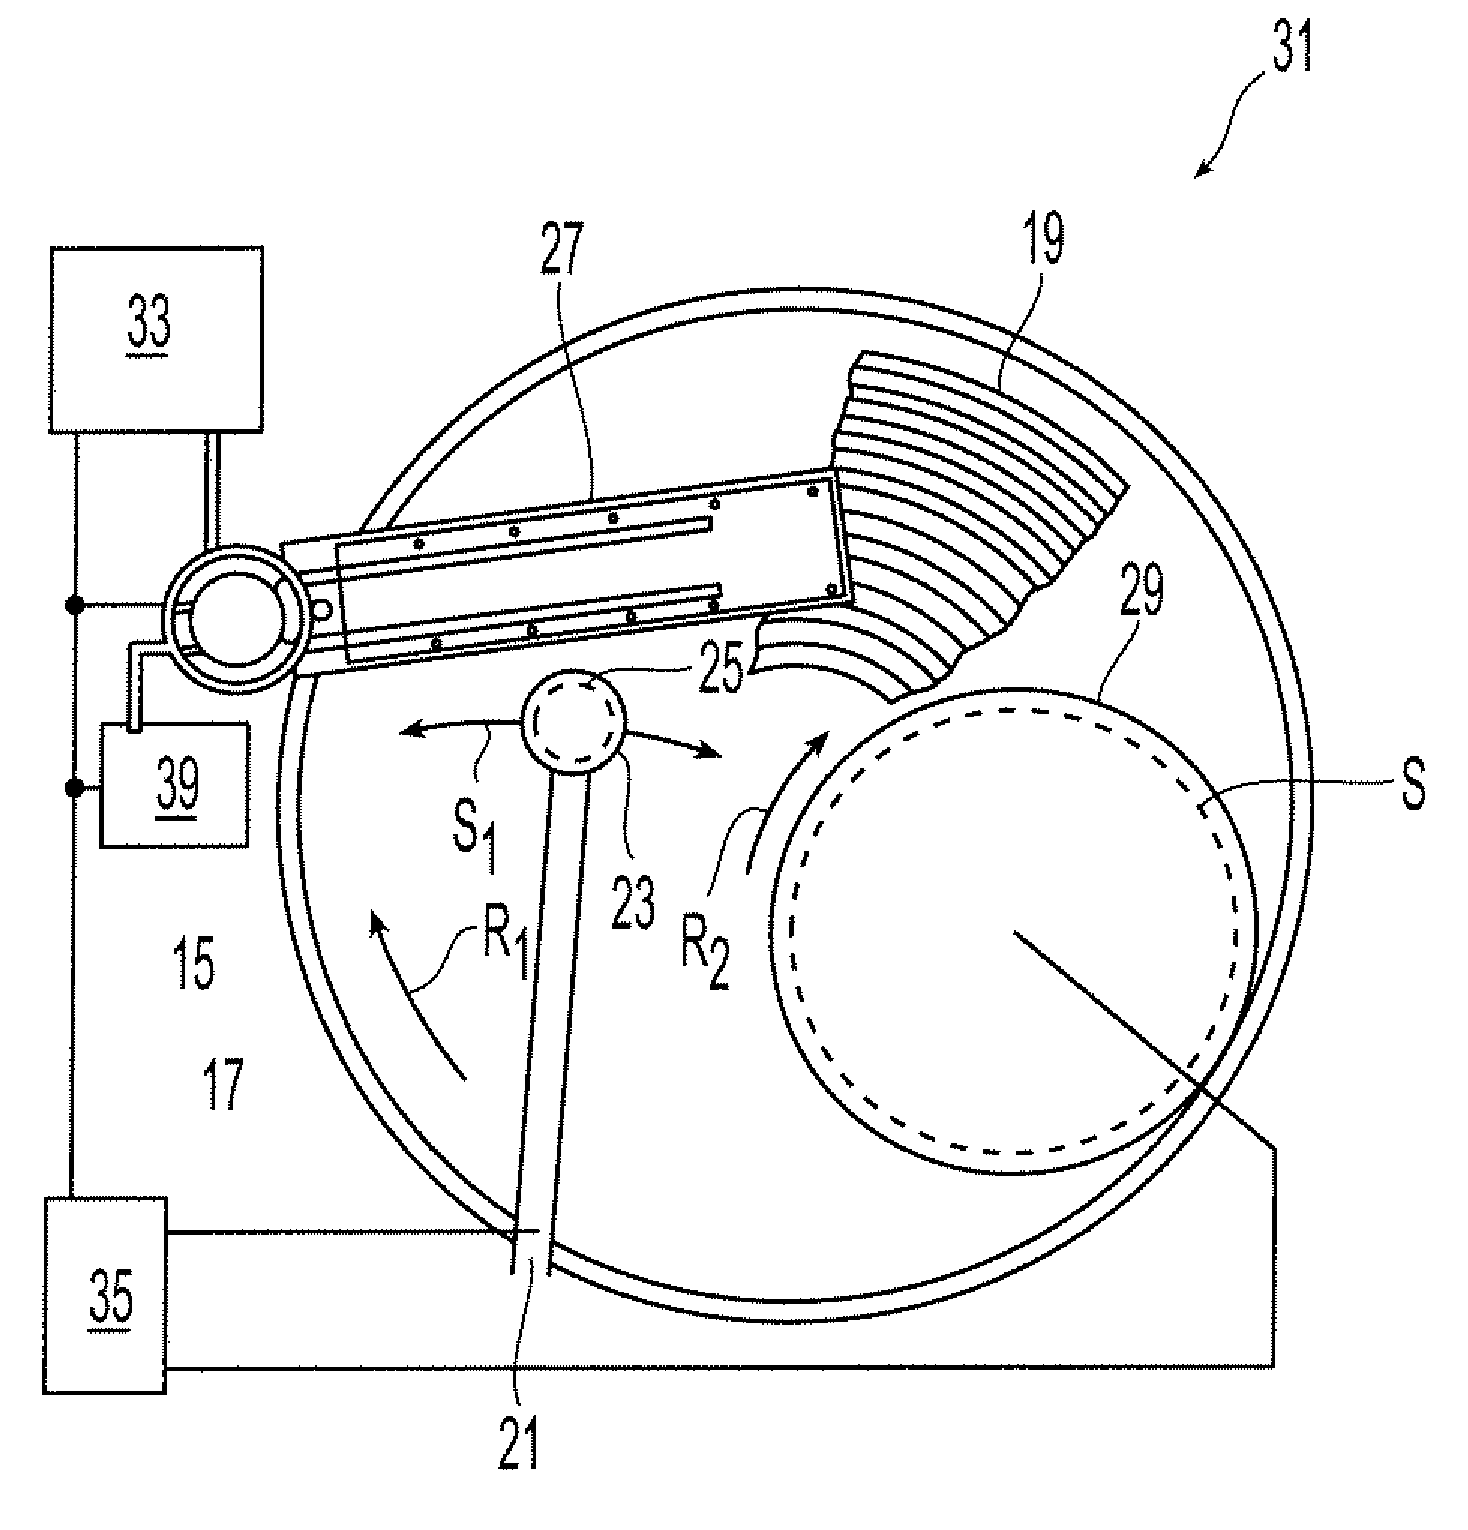 Copper cmp polishing pad cleaning composition comprising of amidoxime compounds